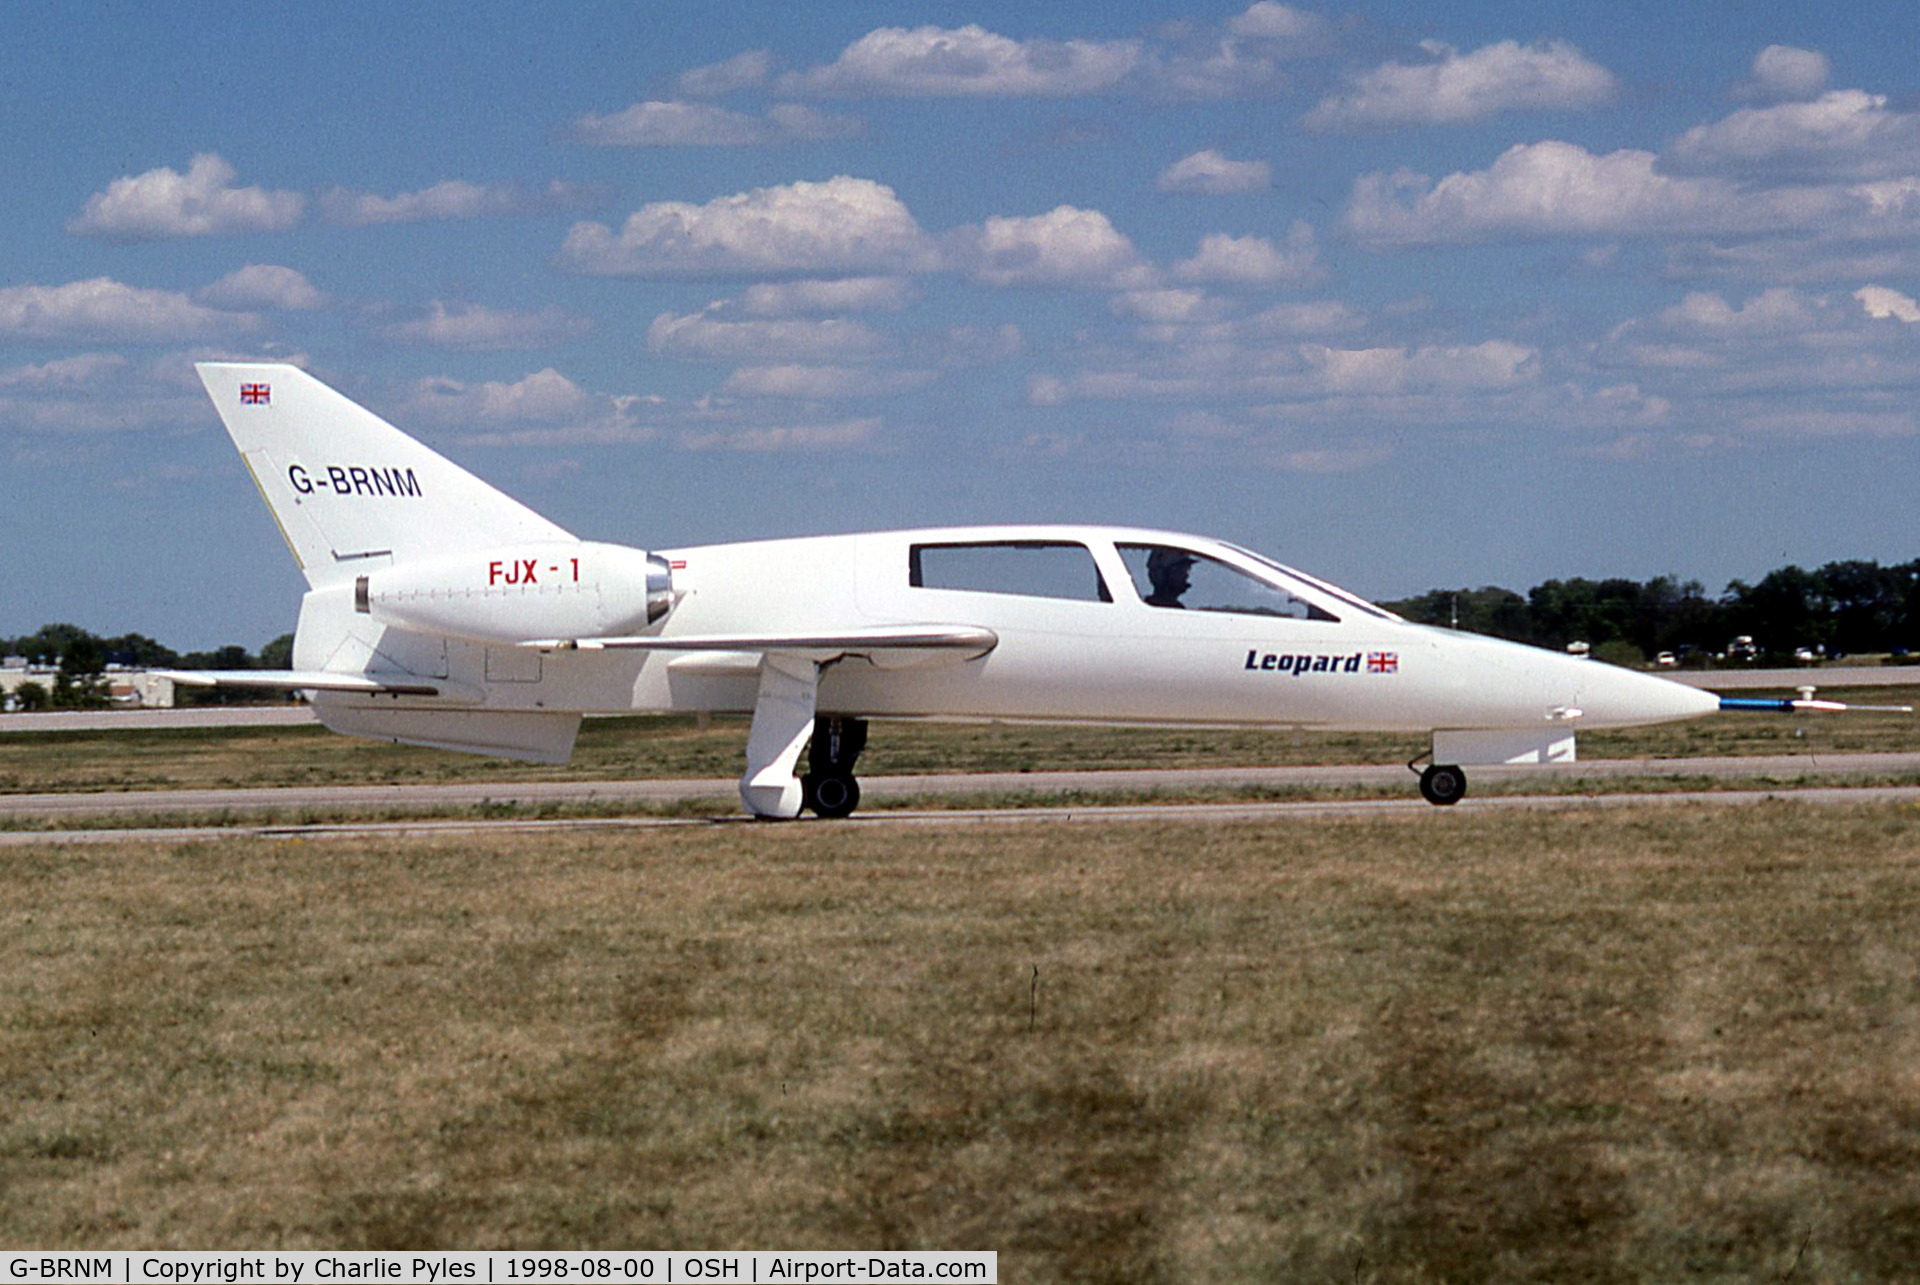 G-BRNM, 1989 Chichester-Miles Leopard C/N 002, FJX-1 Pretty sure this is the prototype